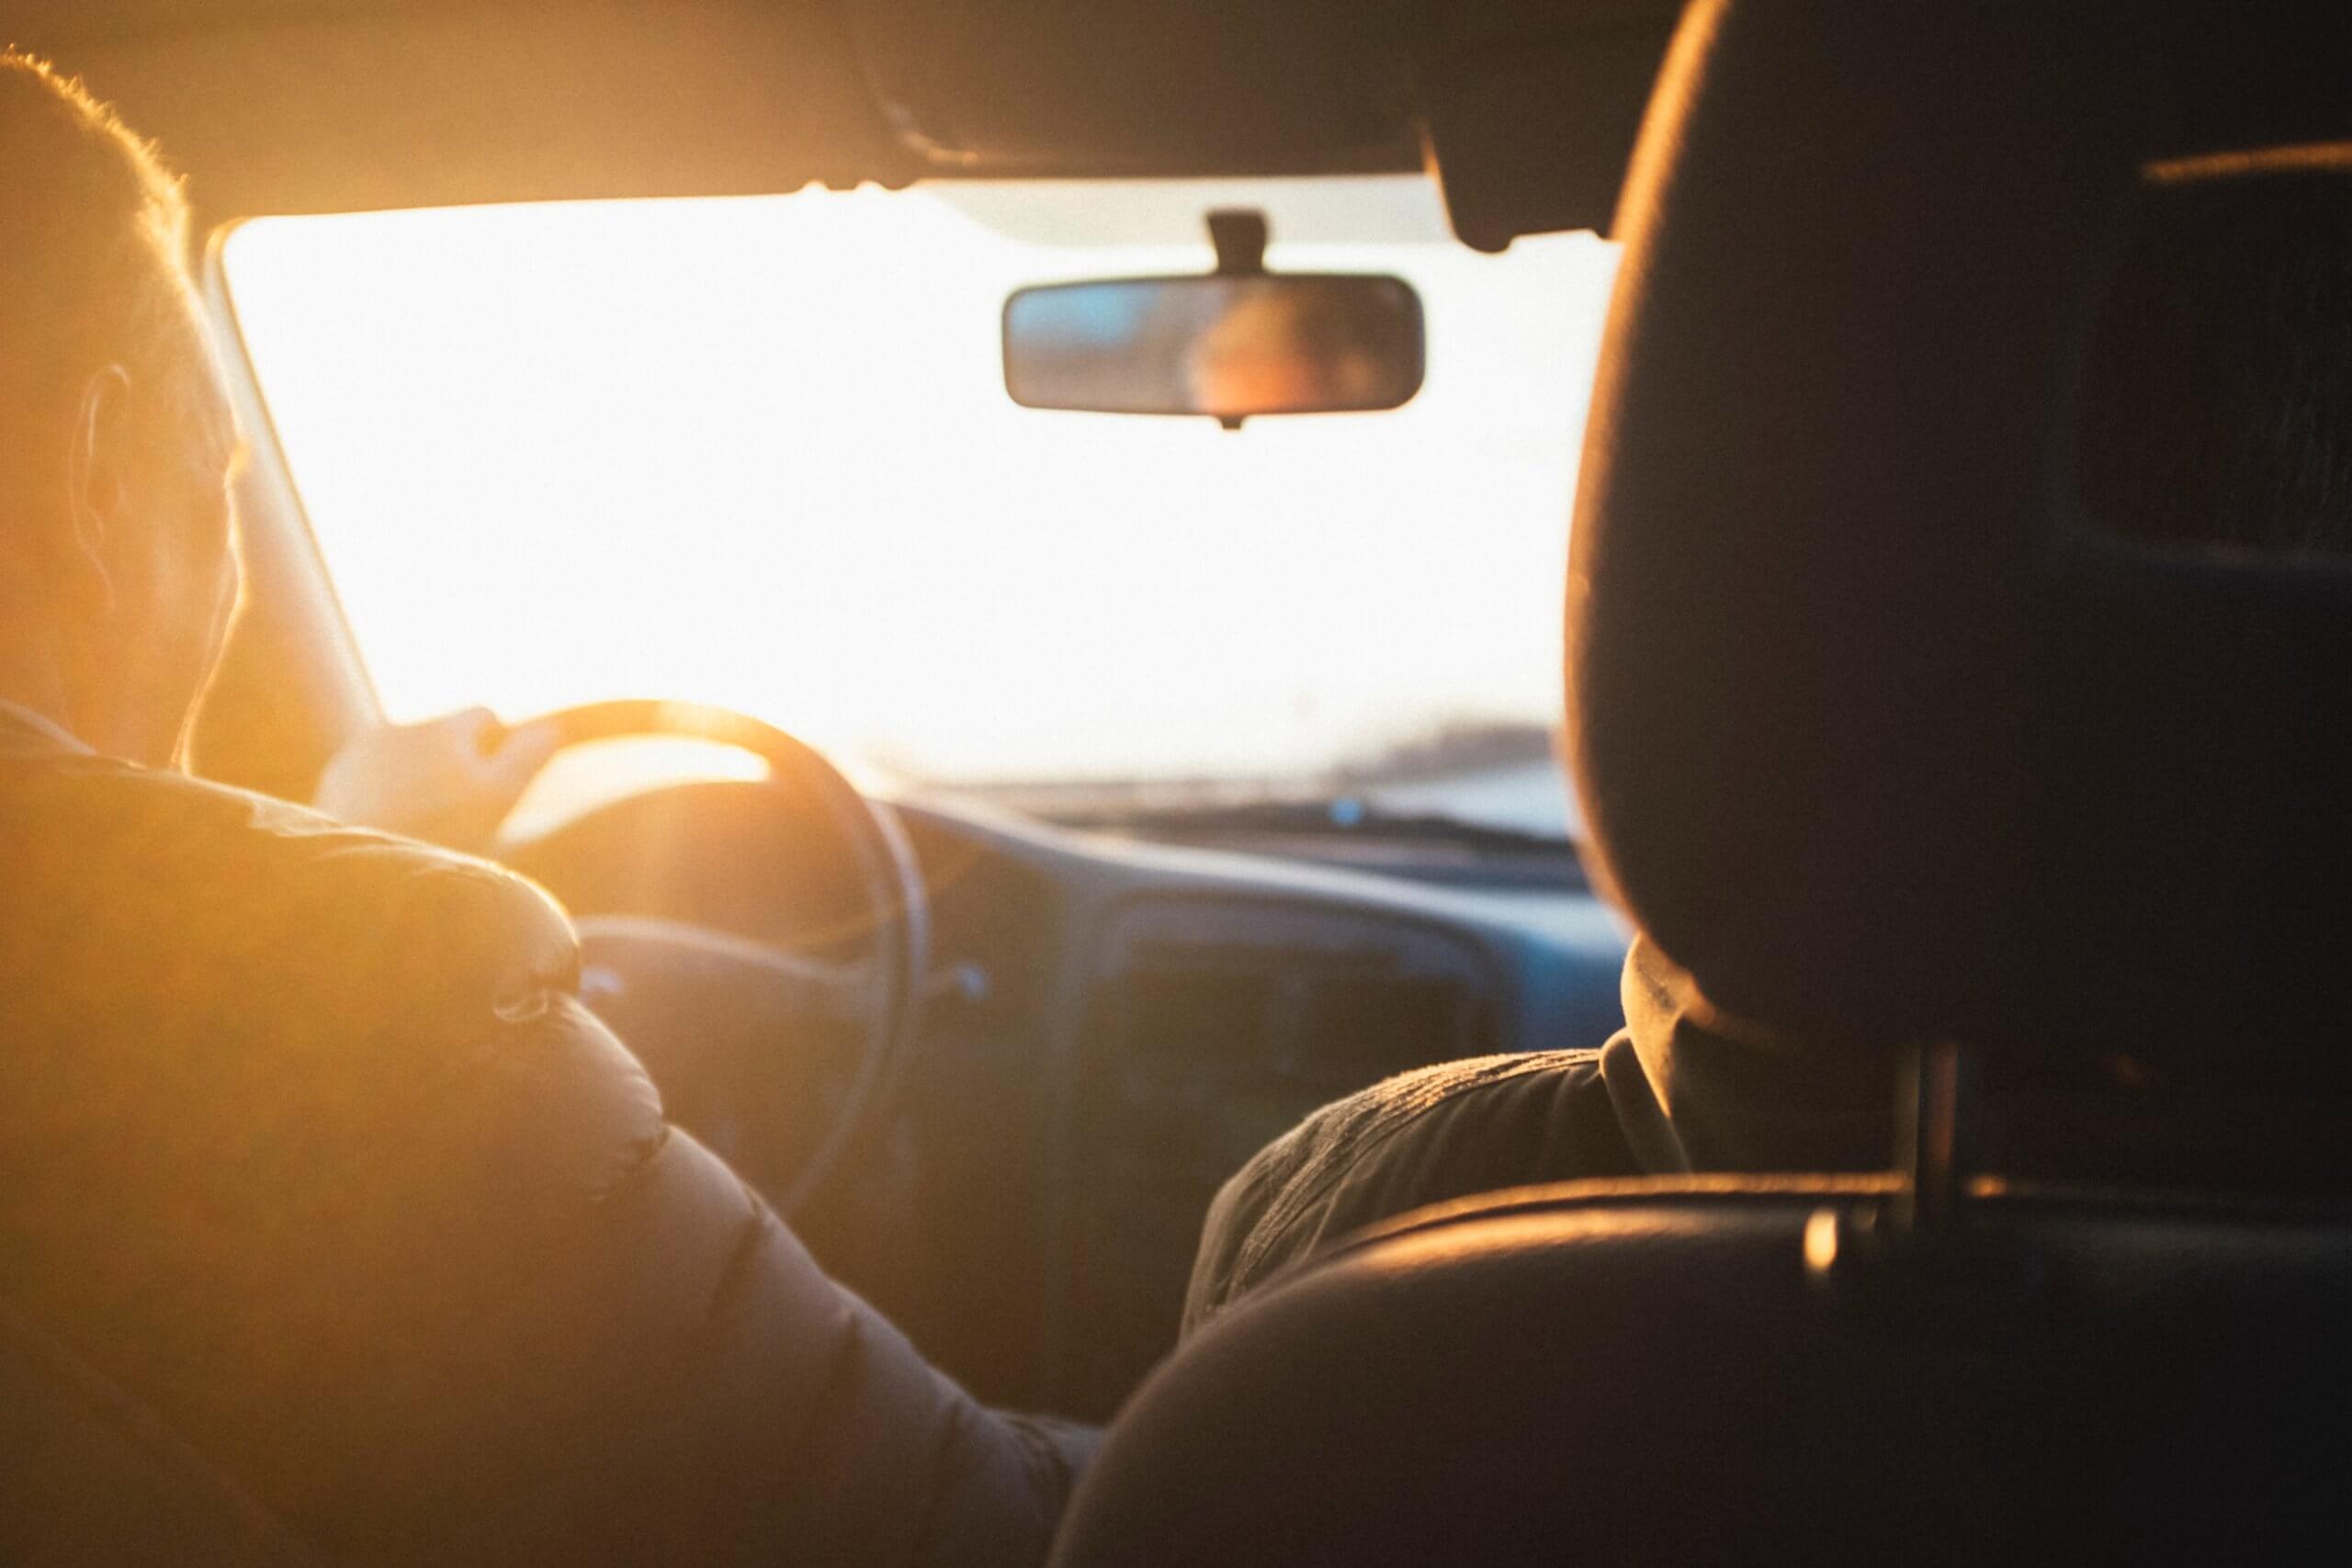 Interior of a car showing a person driving in morning light, taken from the back seat.